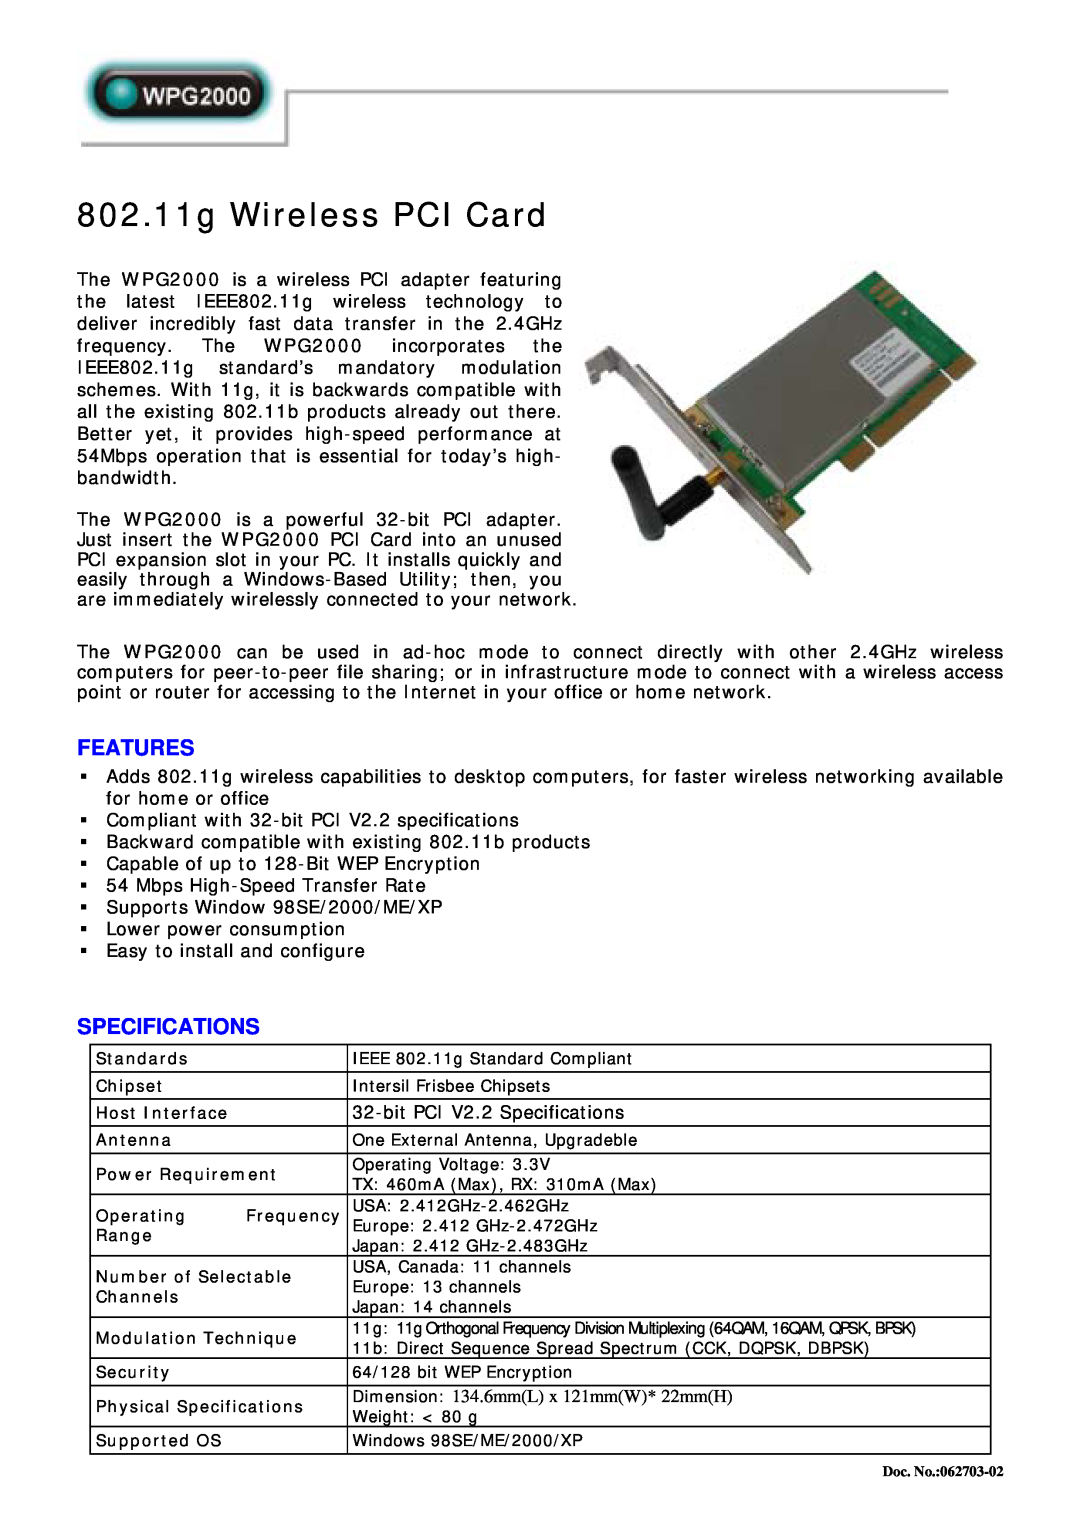 Abocom WPG2000 specifications 802.11g Wireless PCI Card, Features, Specifications 